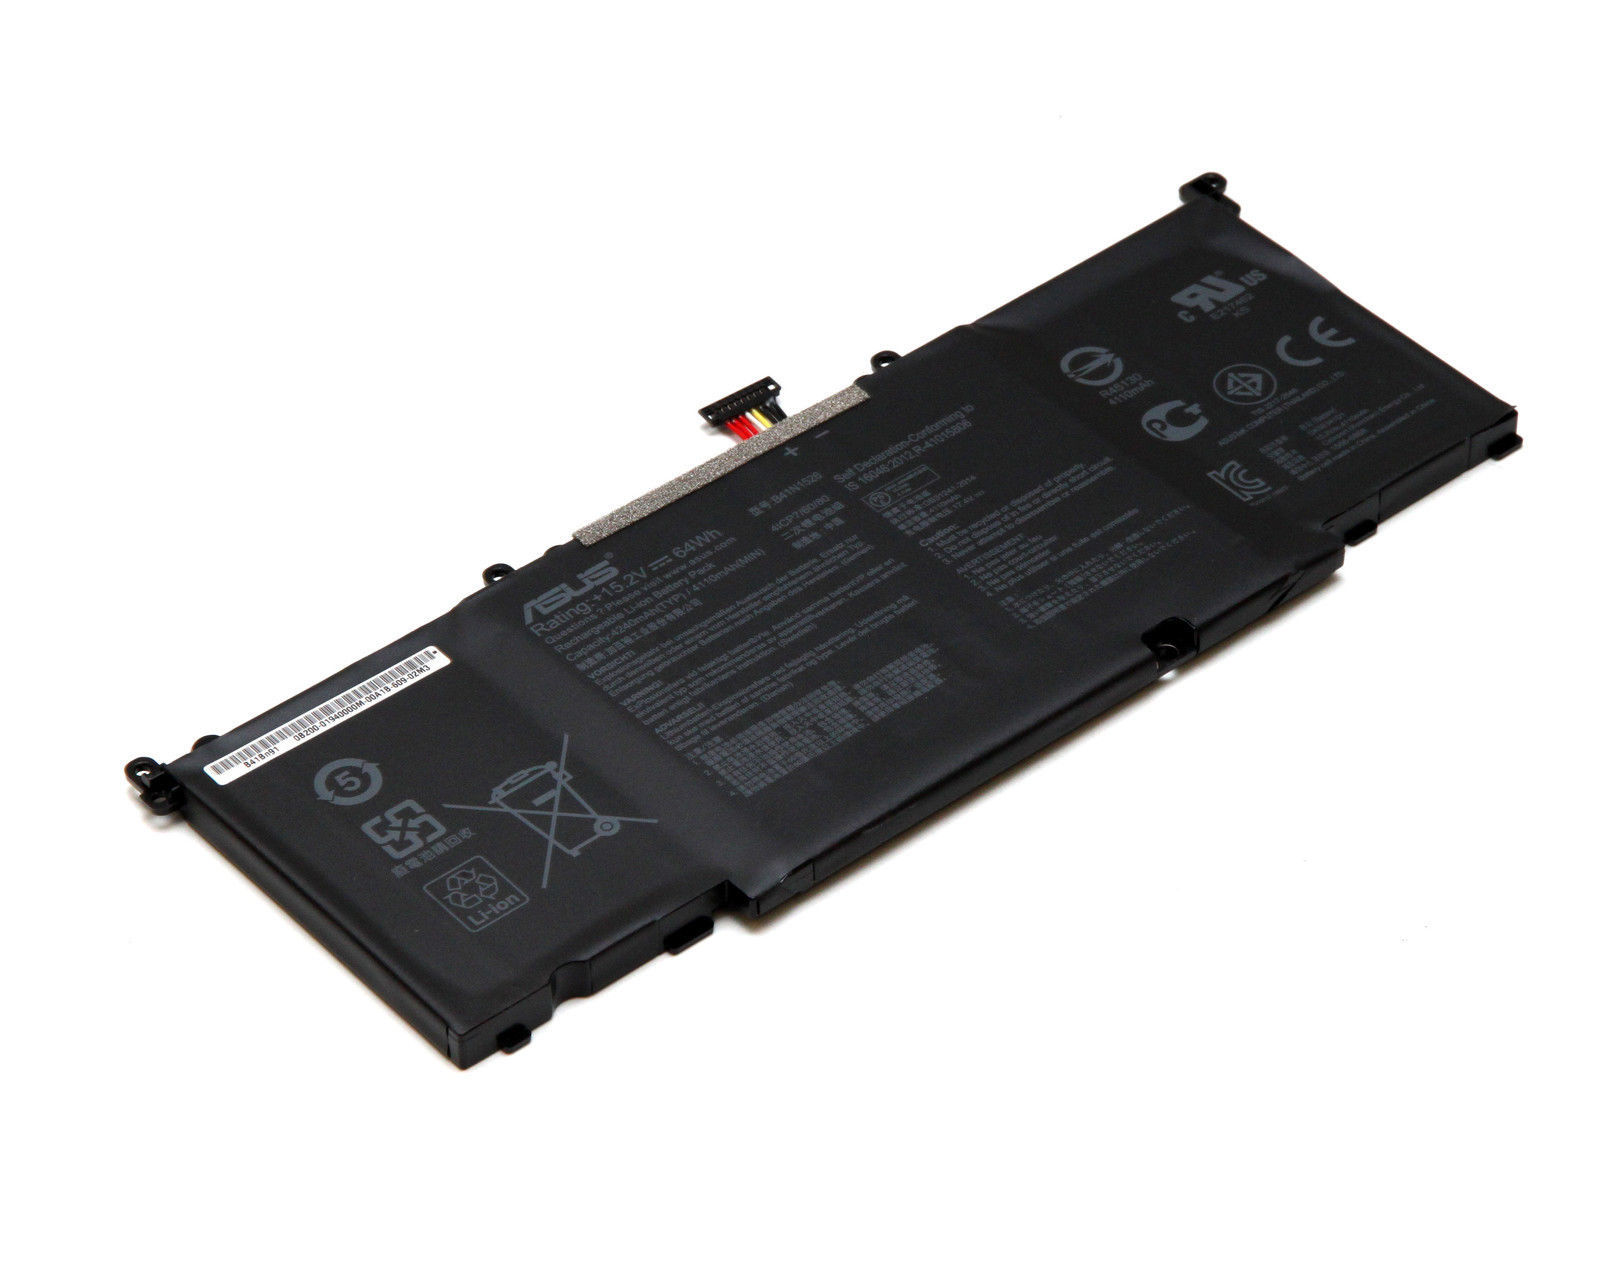 Primary image for Asus B41N1526 Battery For ROG FX502VMDM115T ROG FX502VM-DM119T ROG FX502VMDM119T